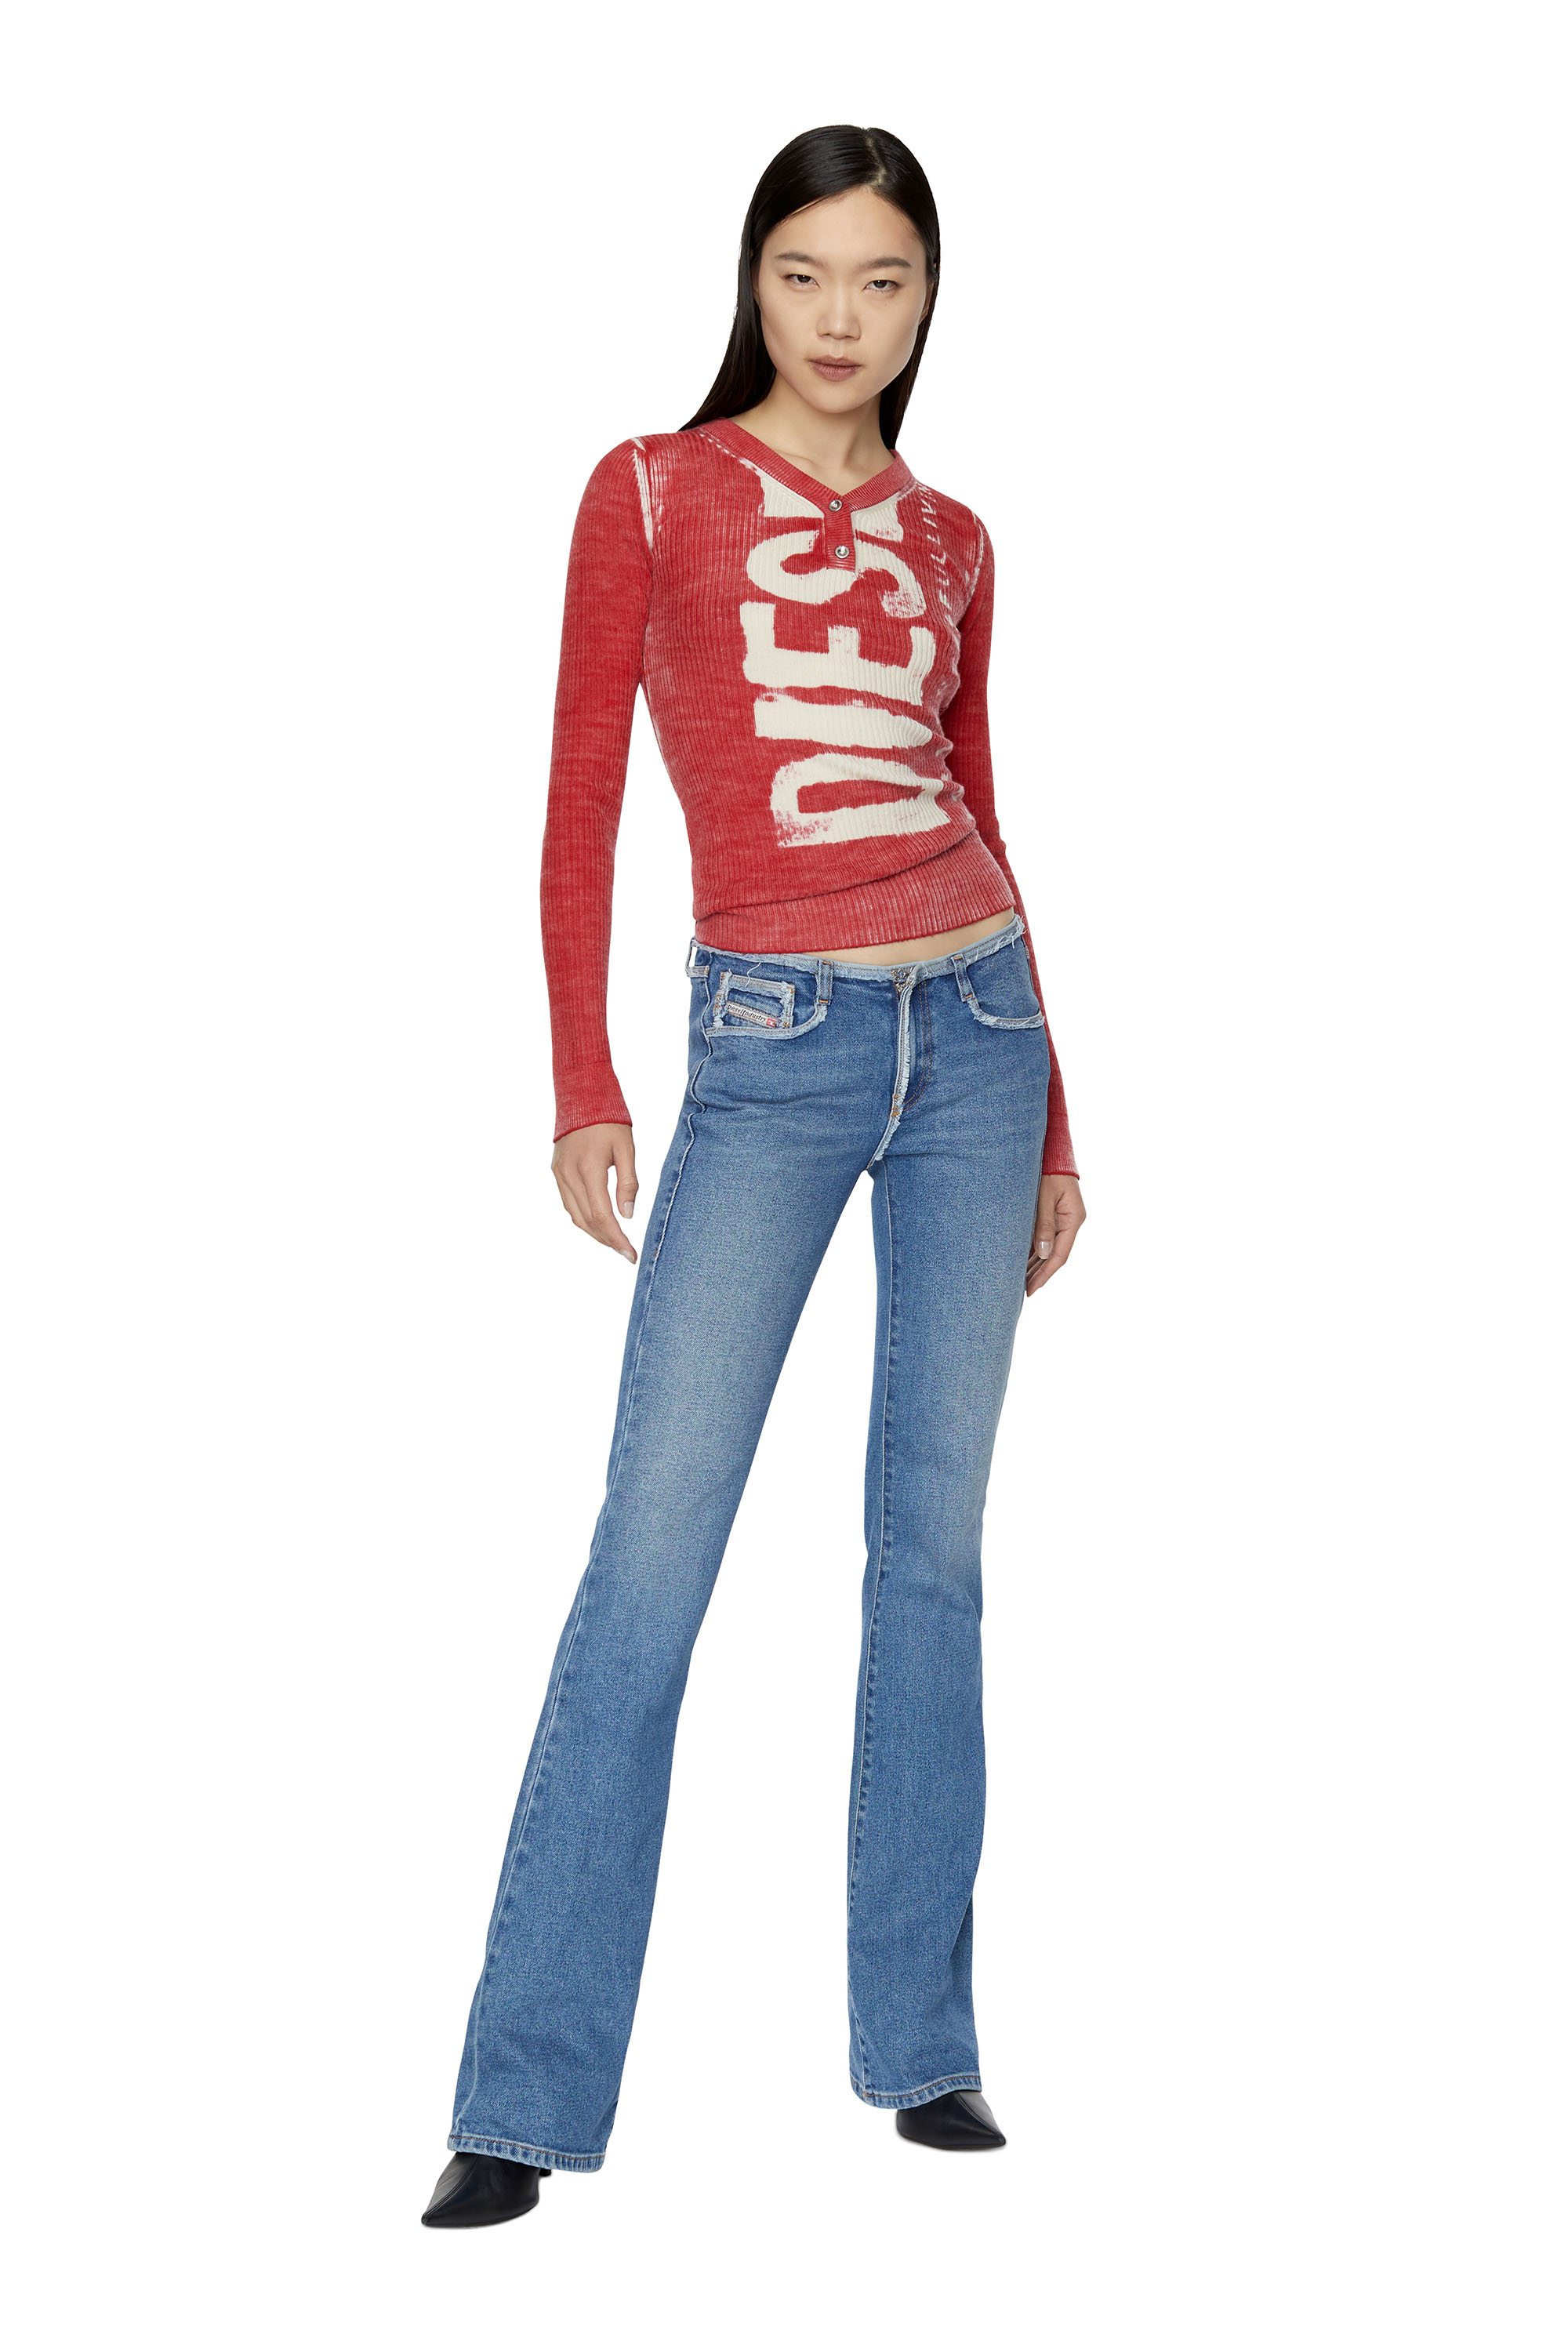 1969 D-EBBEY 09E19 Bootcut and Flare Jeans, Medium blue - Jeans